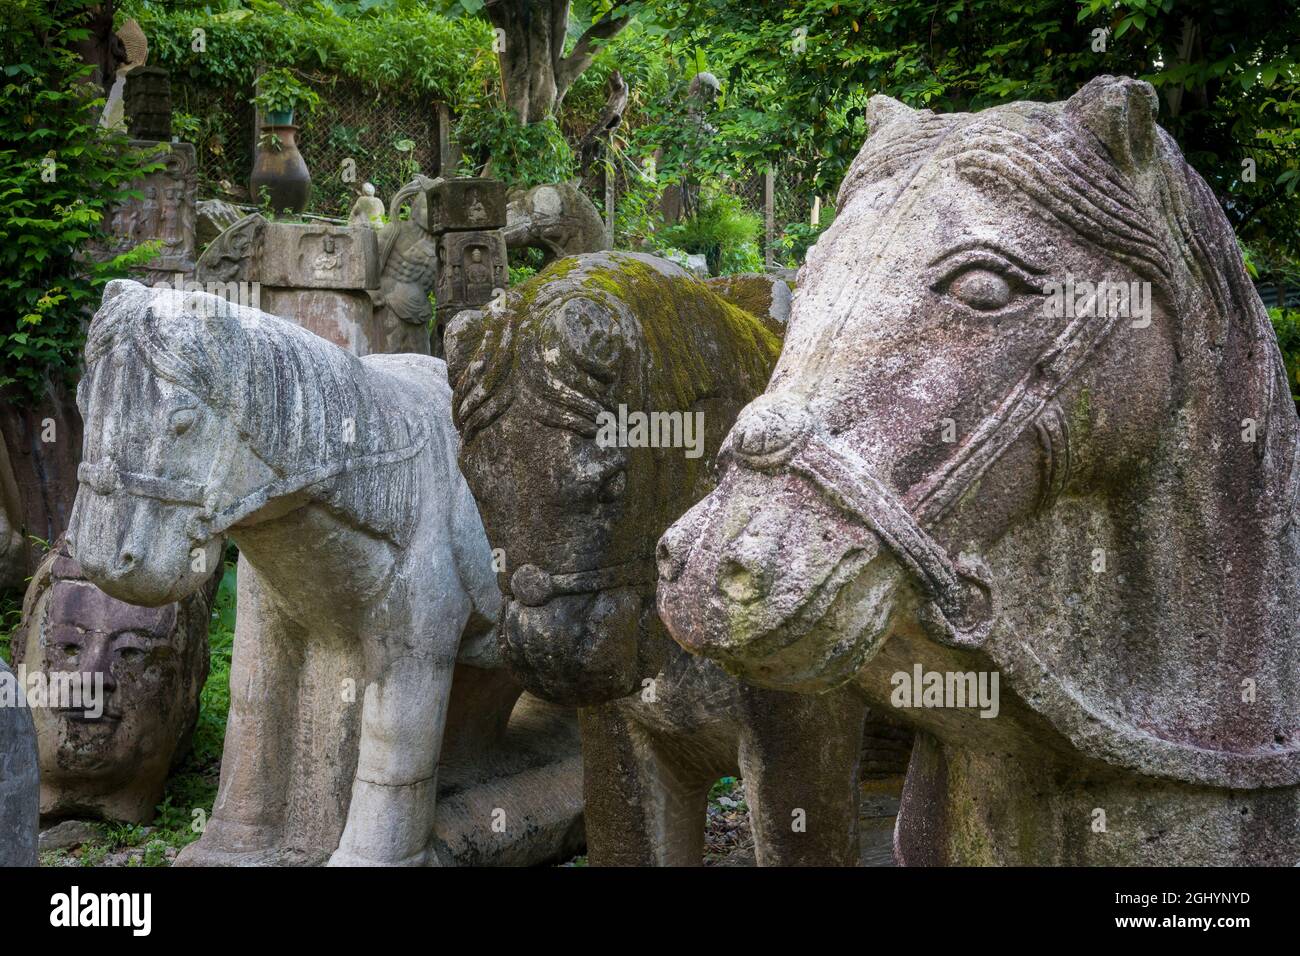 Part of the eclectic collection of Asian sculptures in the grounds of the privately-owned self-styled 'Hong Kong Museum of Stone Sculptures' in Tai Po Stock Photo